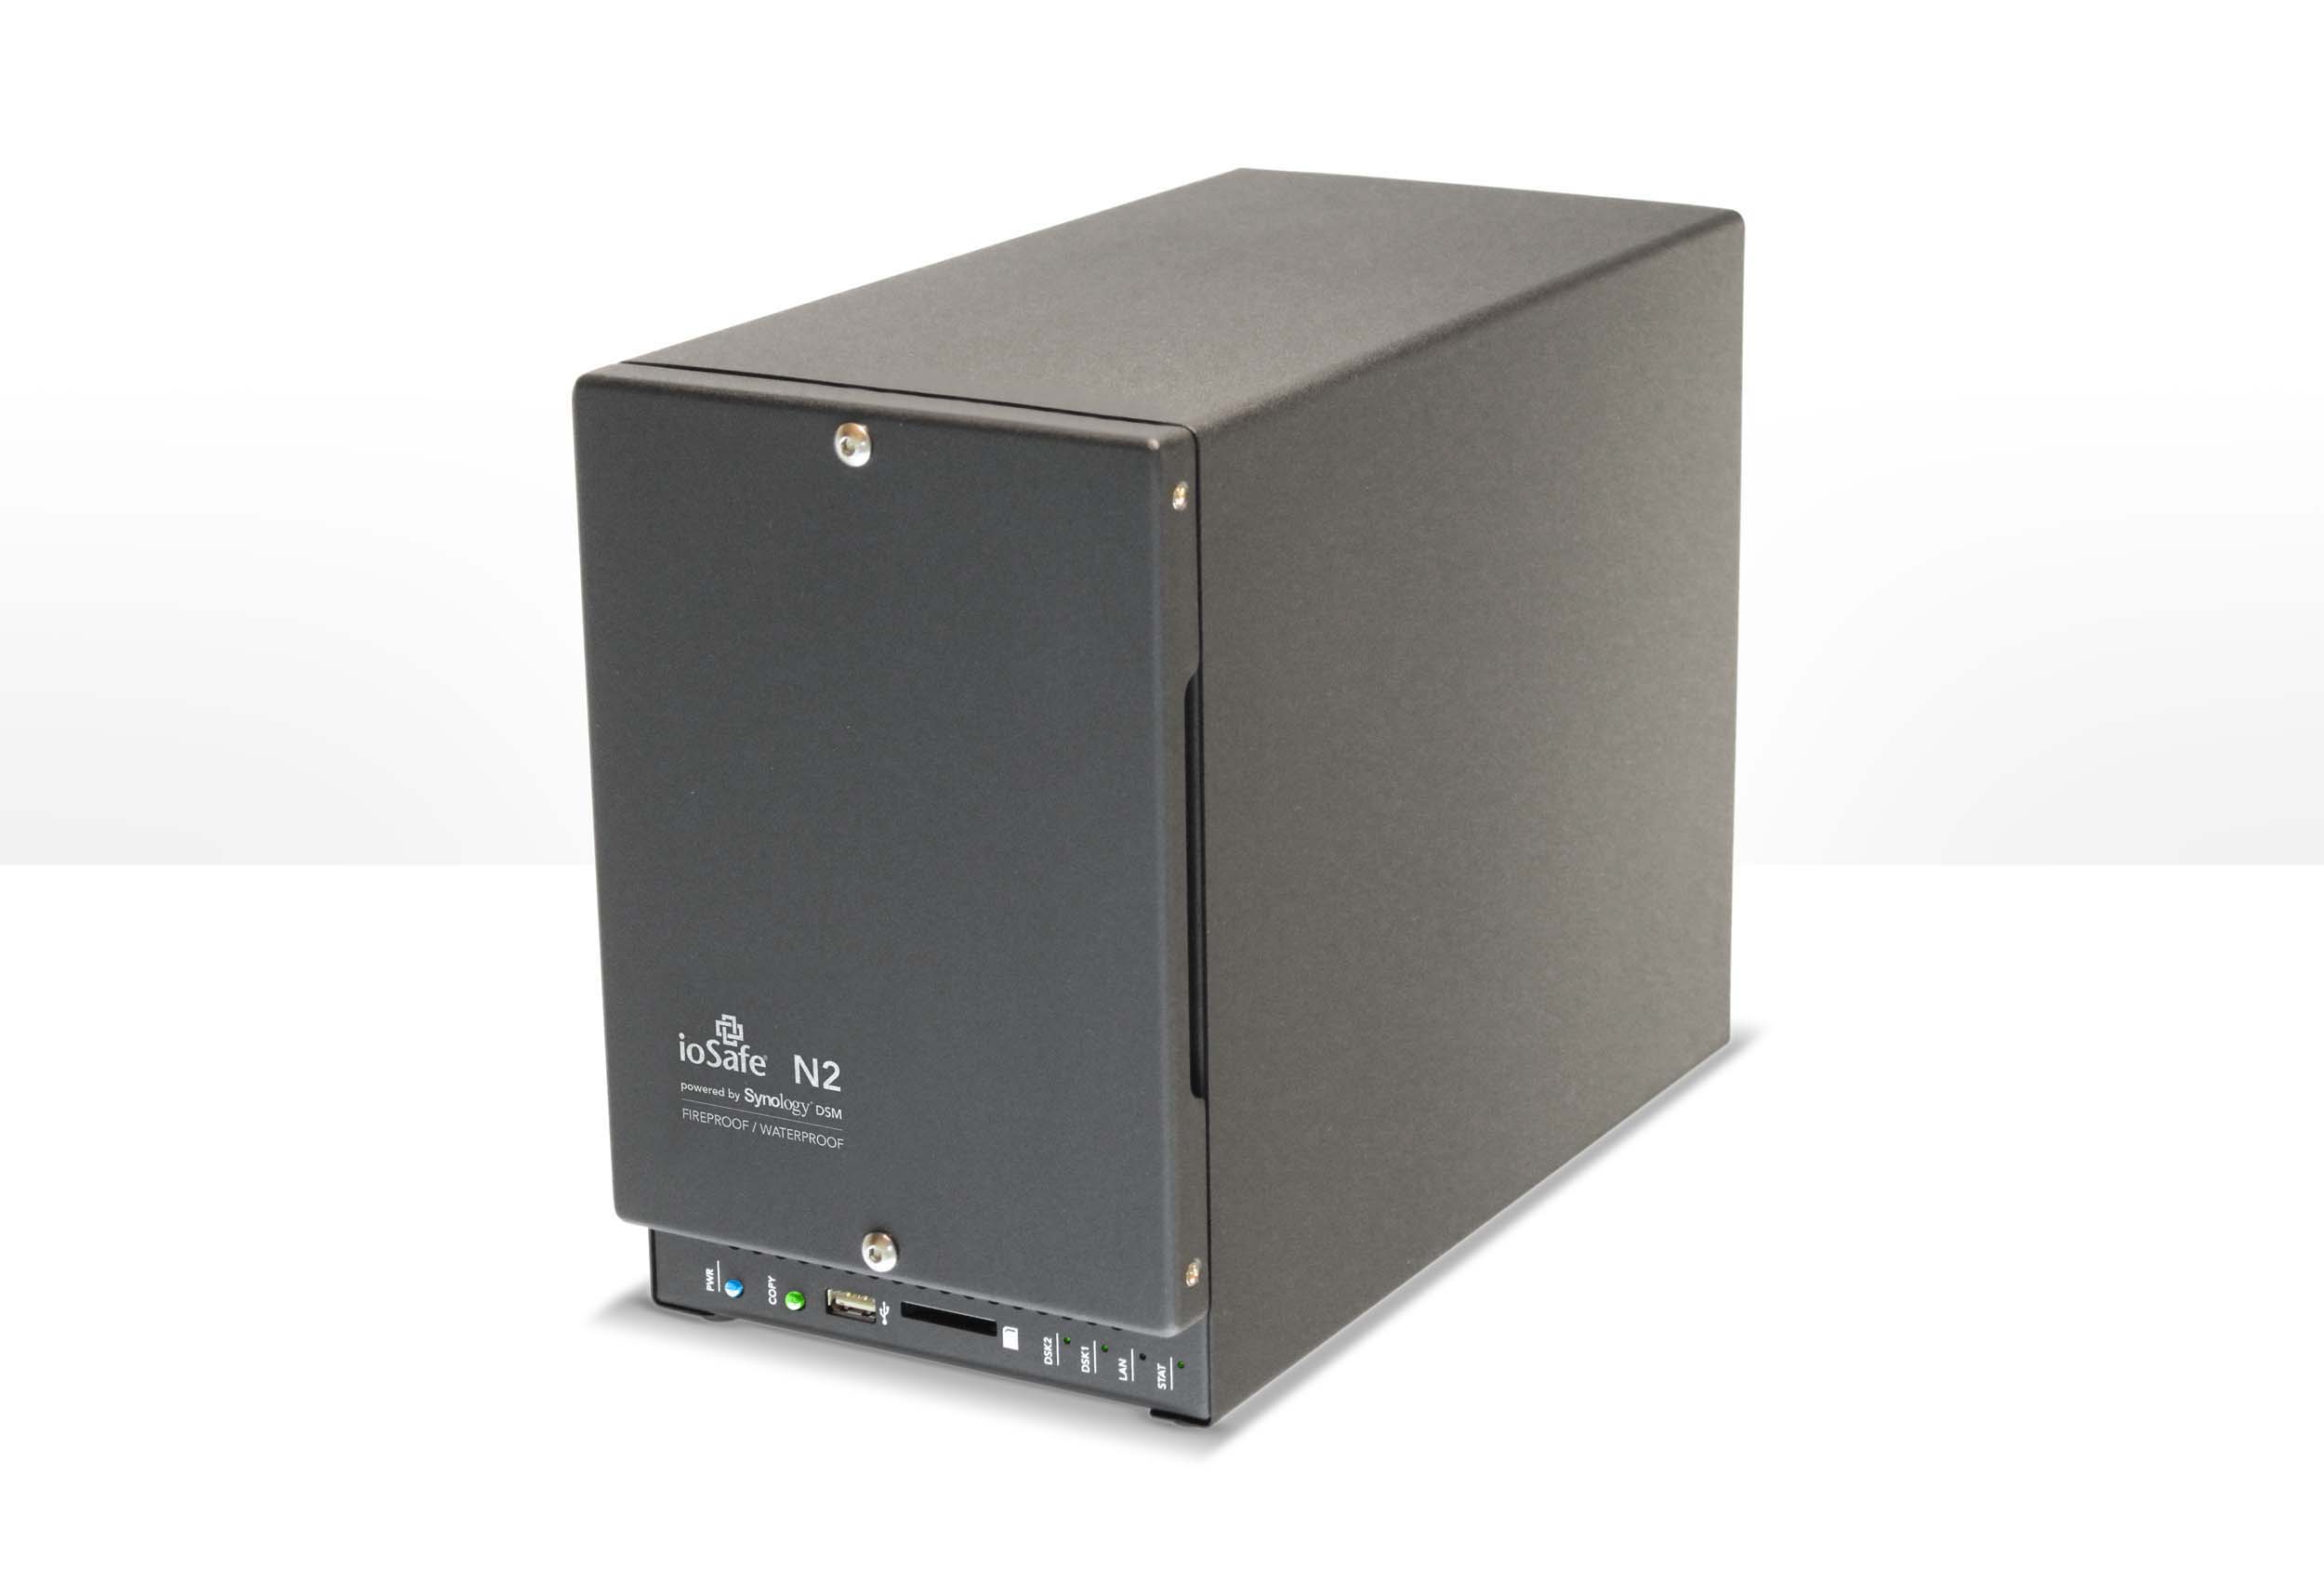 ioSafe Unveils New Disaster-Proof NAS Cloud Appliance